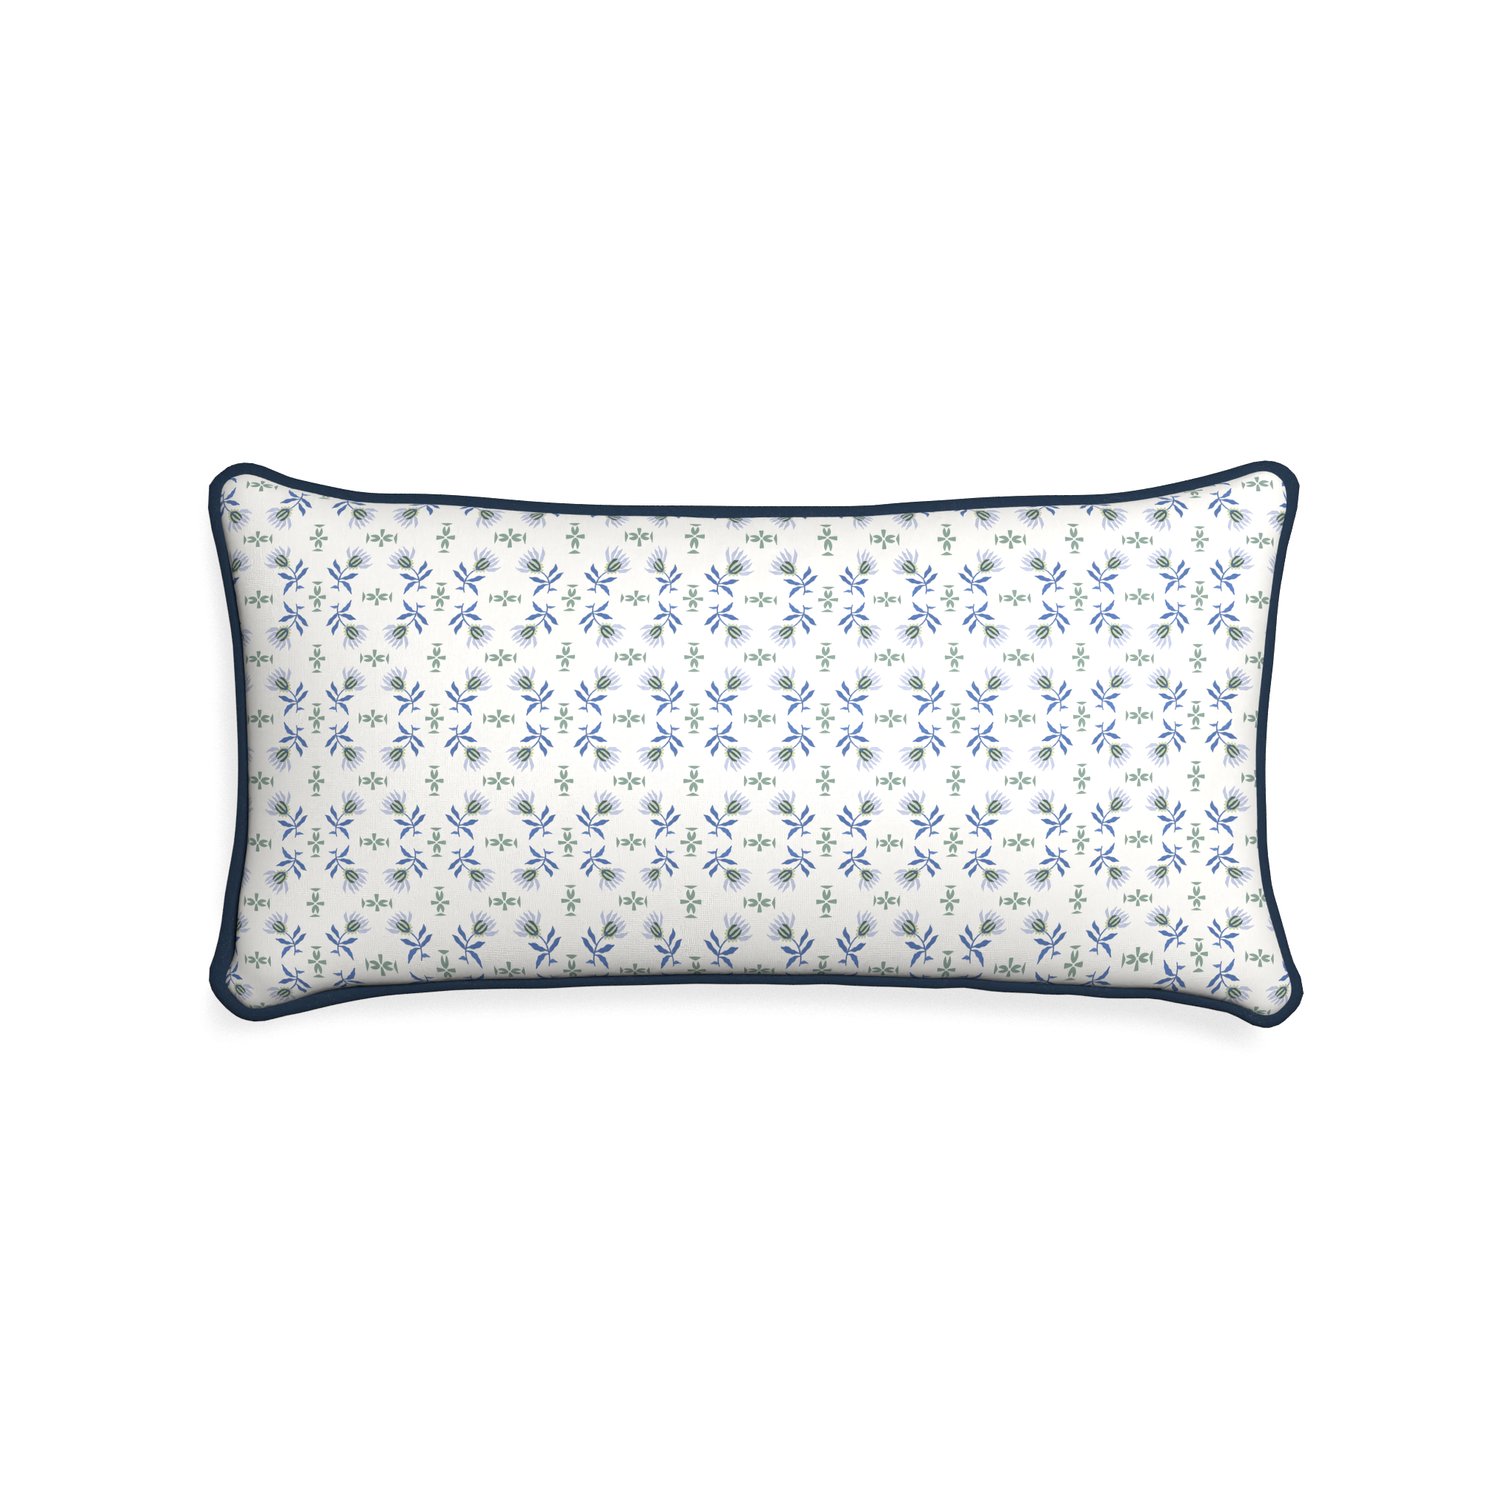 Midi-lumbar lee custom blue & green floralpillow with c piping on white background